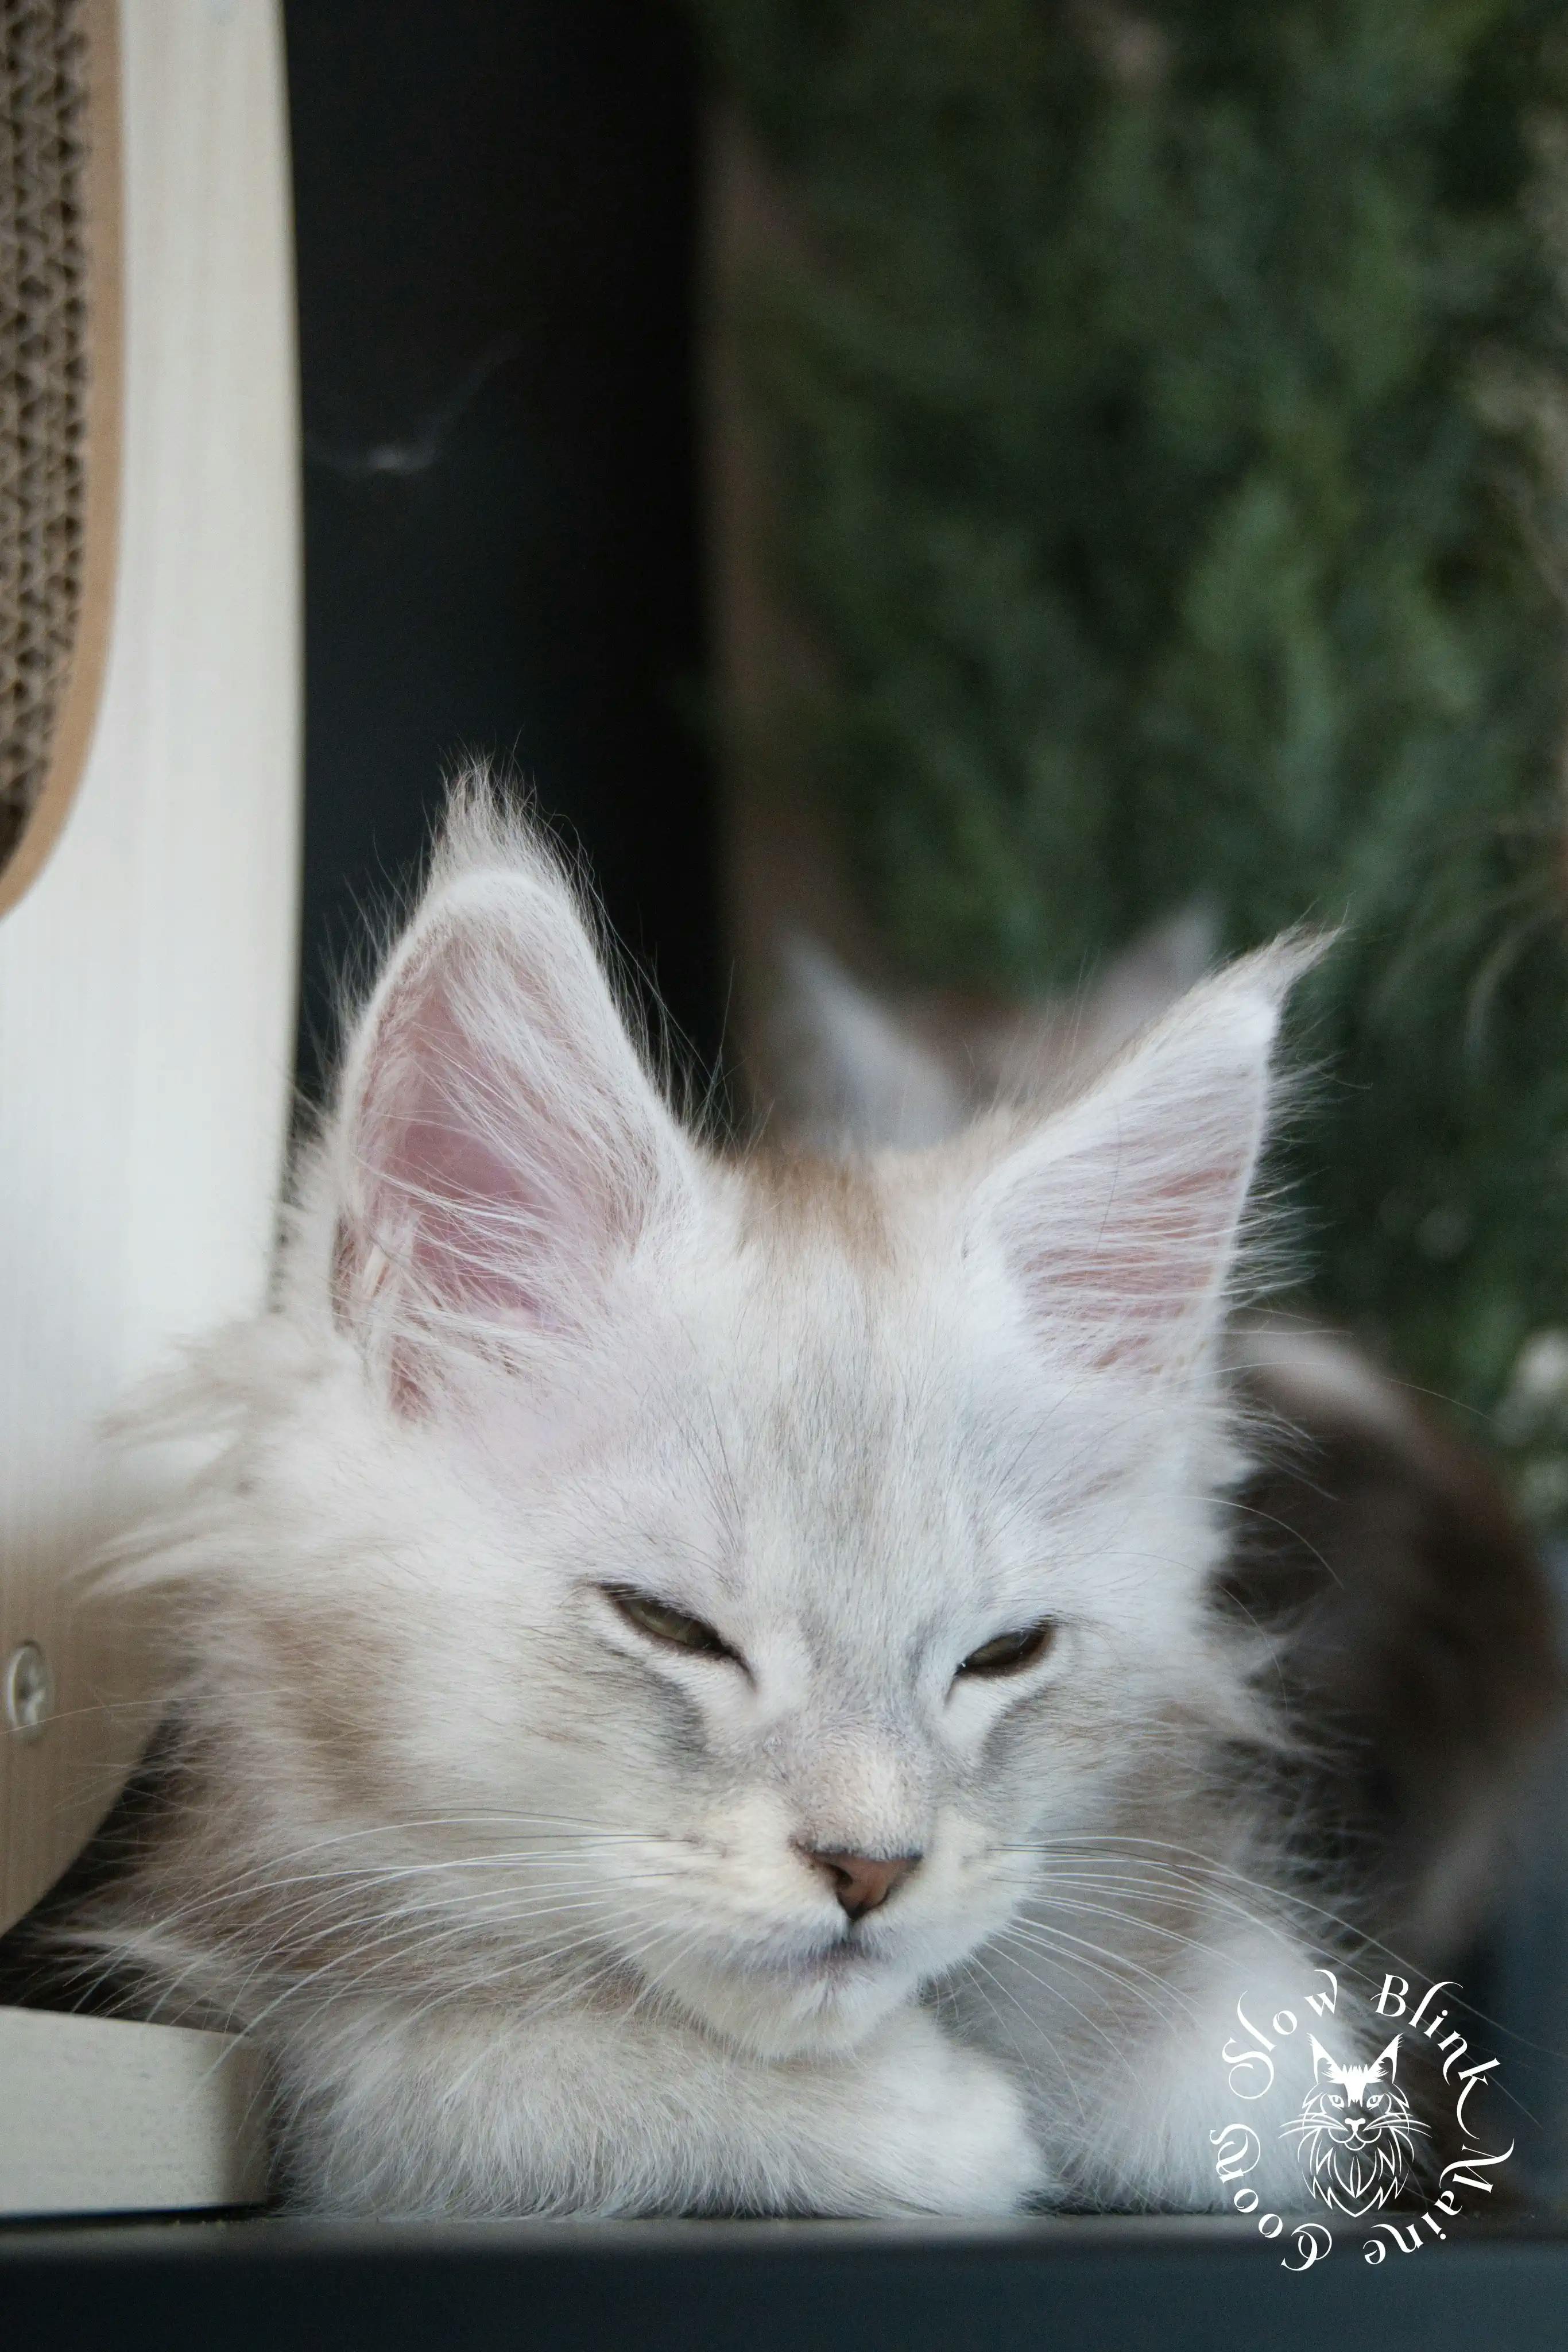 High Silver Maine Coon Kittens > black silver tabby maine coon kitten | ems code ns 22 23 24 25 | slowblinkmainecoons | 591